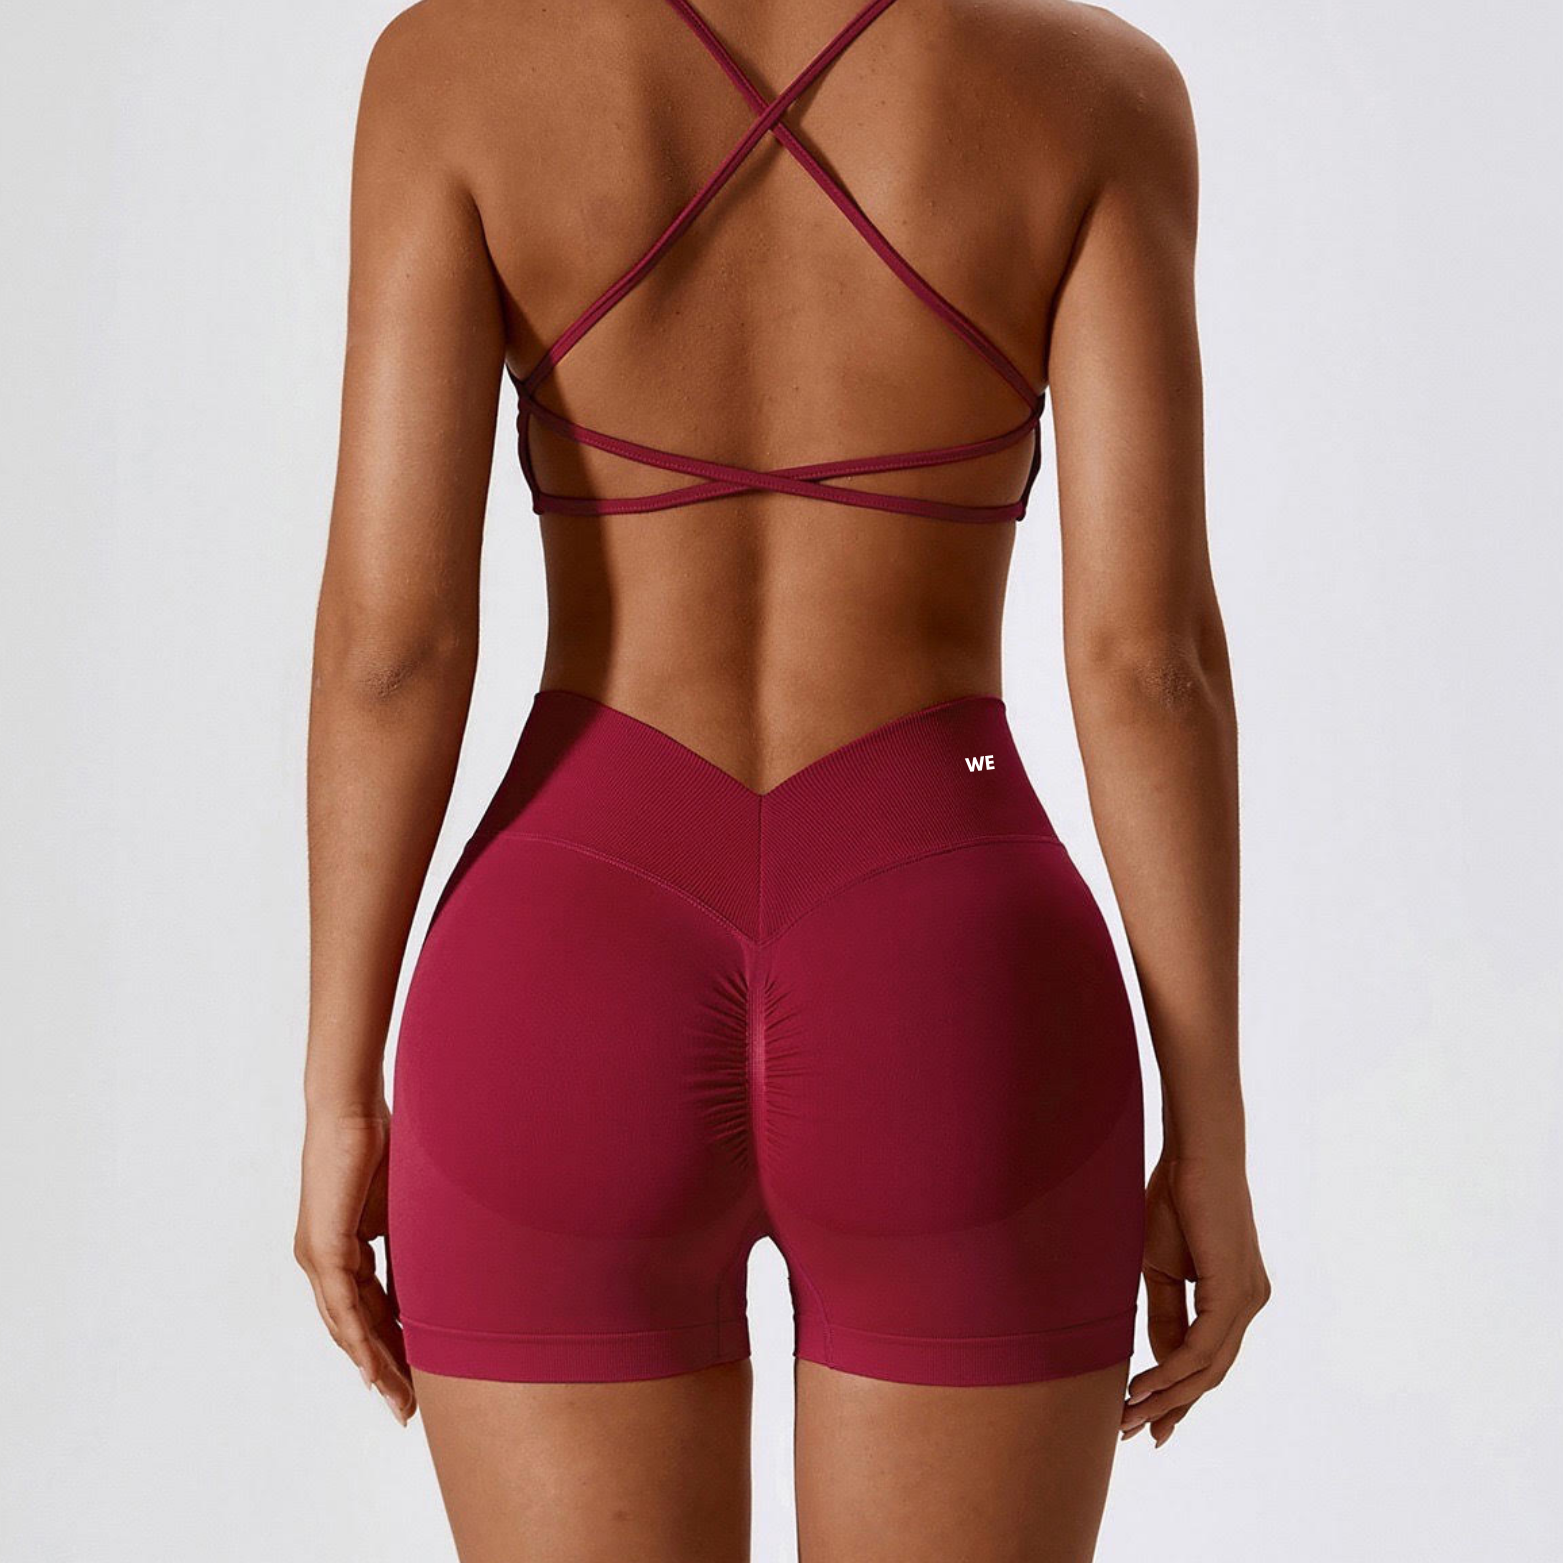 Perform burgundy - Booty shorts & Top | Activewear